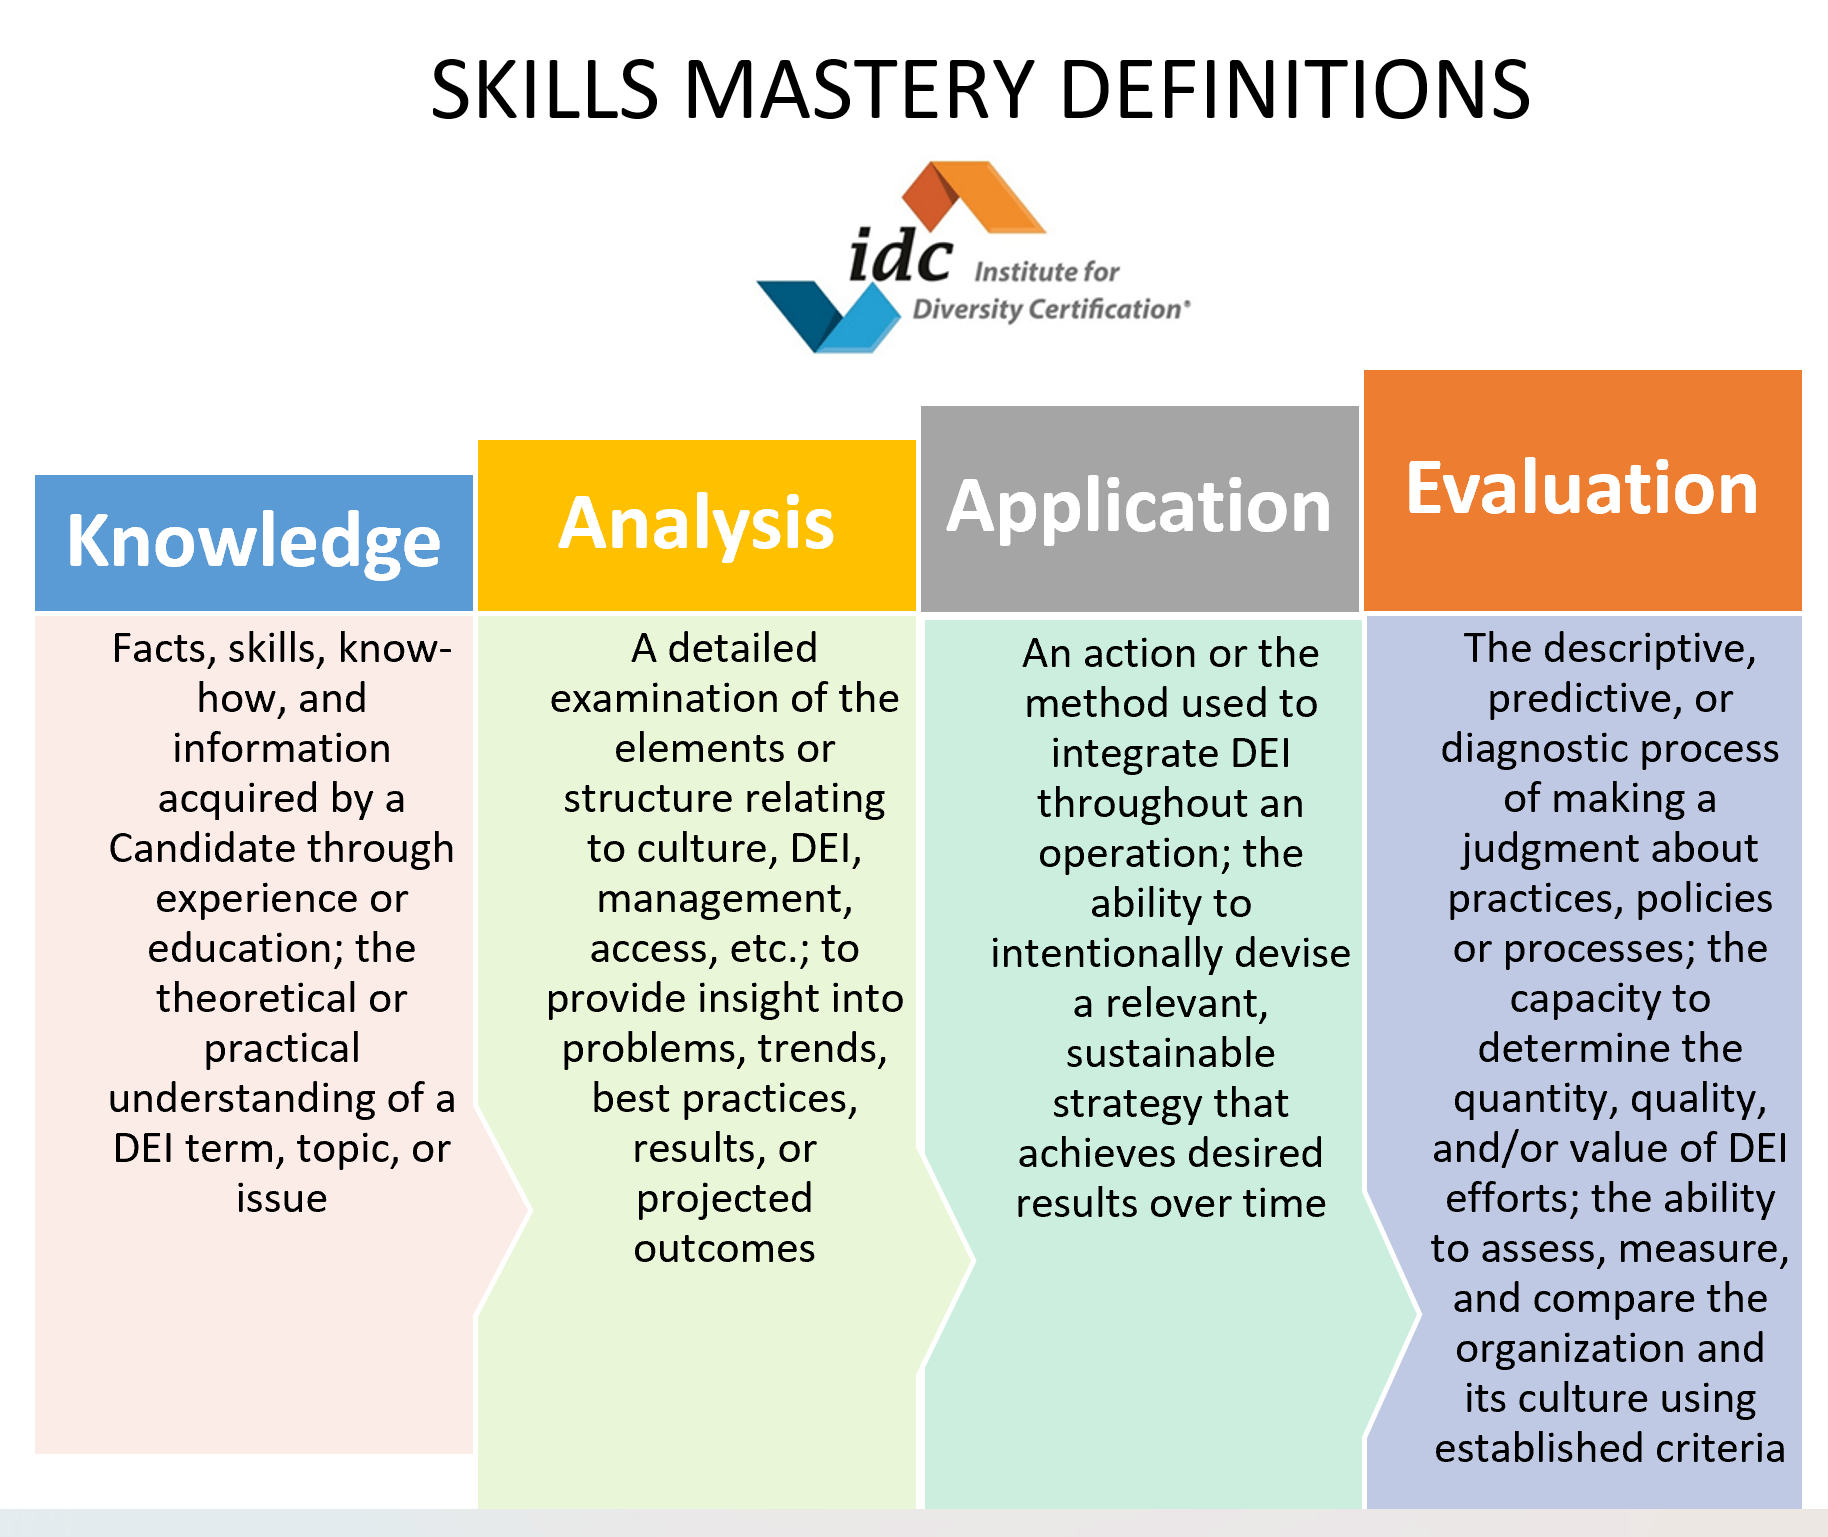 Skills mastery definitions of knowledge, analysis, application, and evaluation